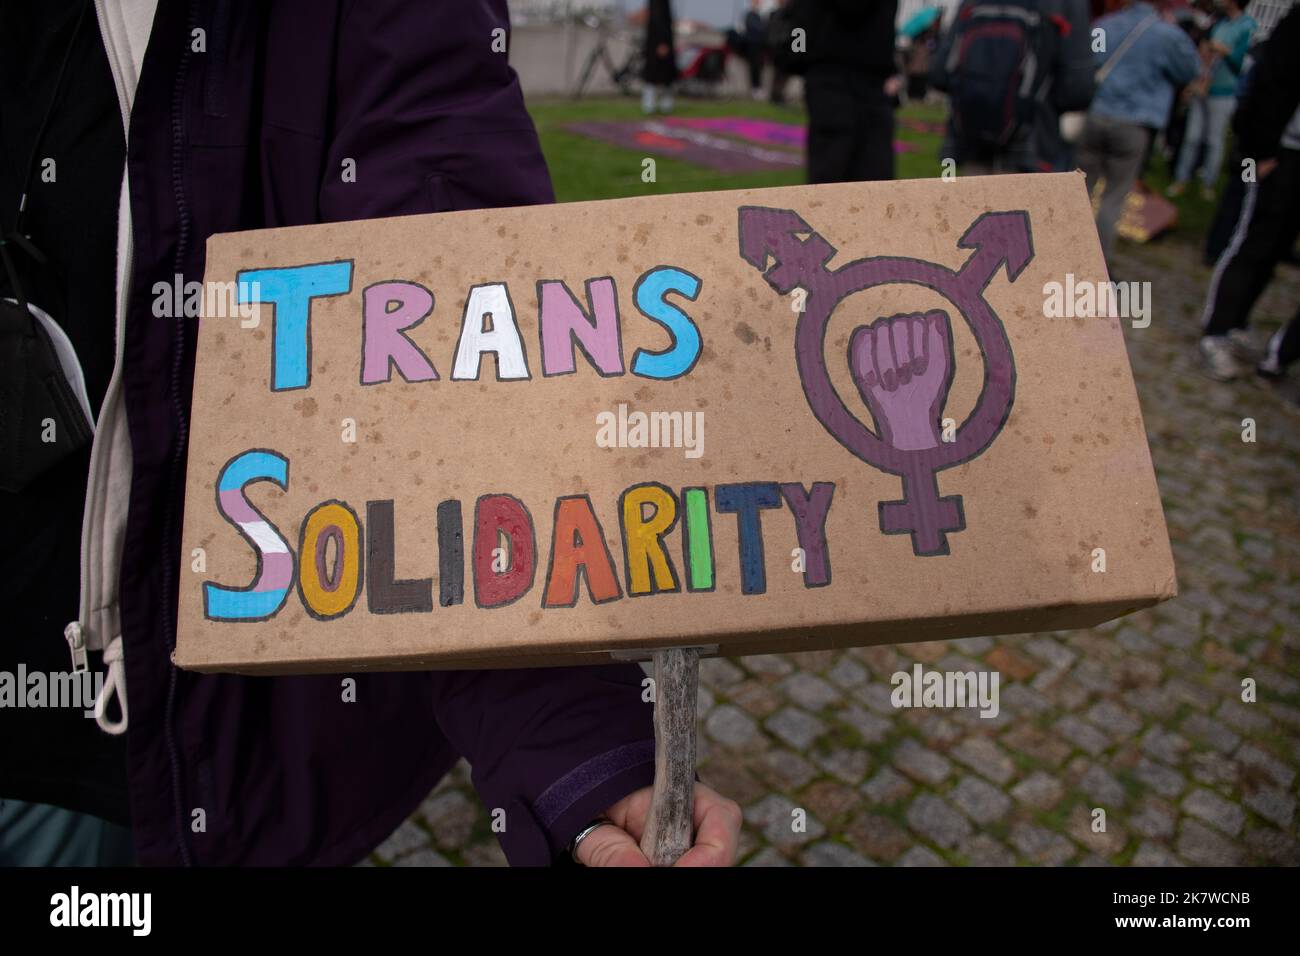 A Transgender rights protester holds up a trans solidarity sign at a demonstration against Terfs in Berlin, Germany Stock Photo